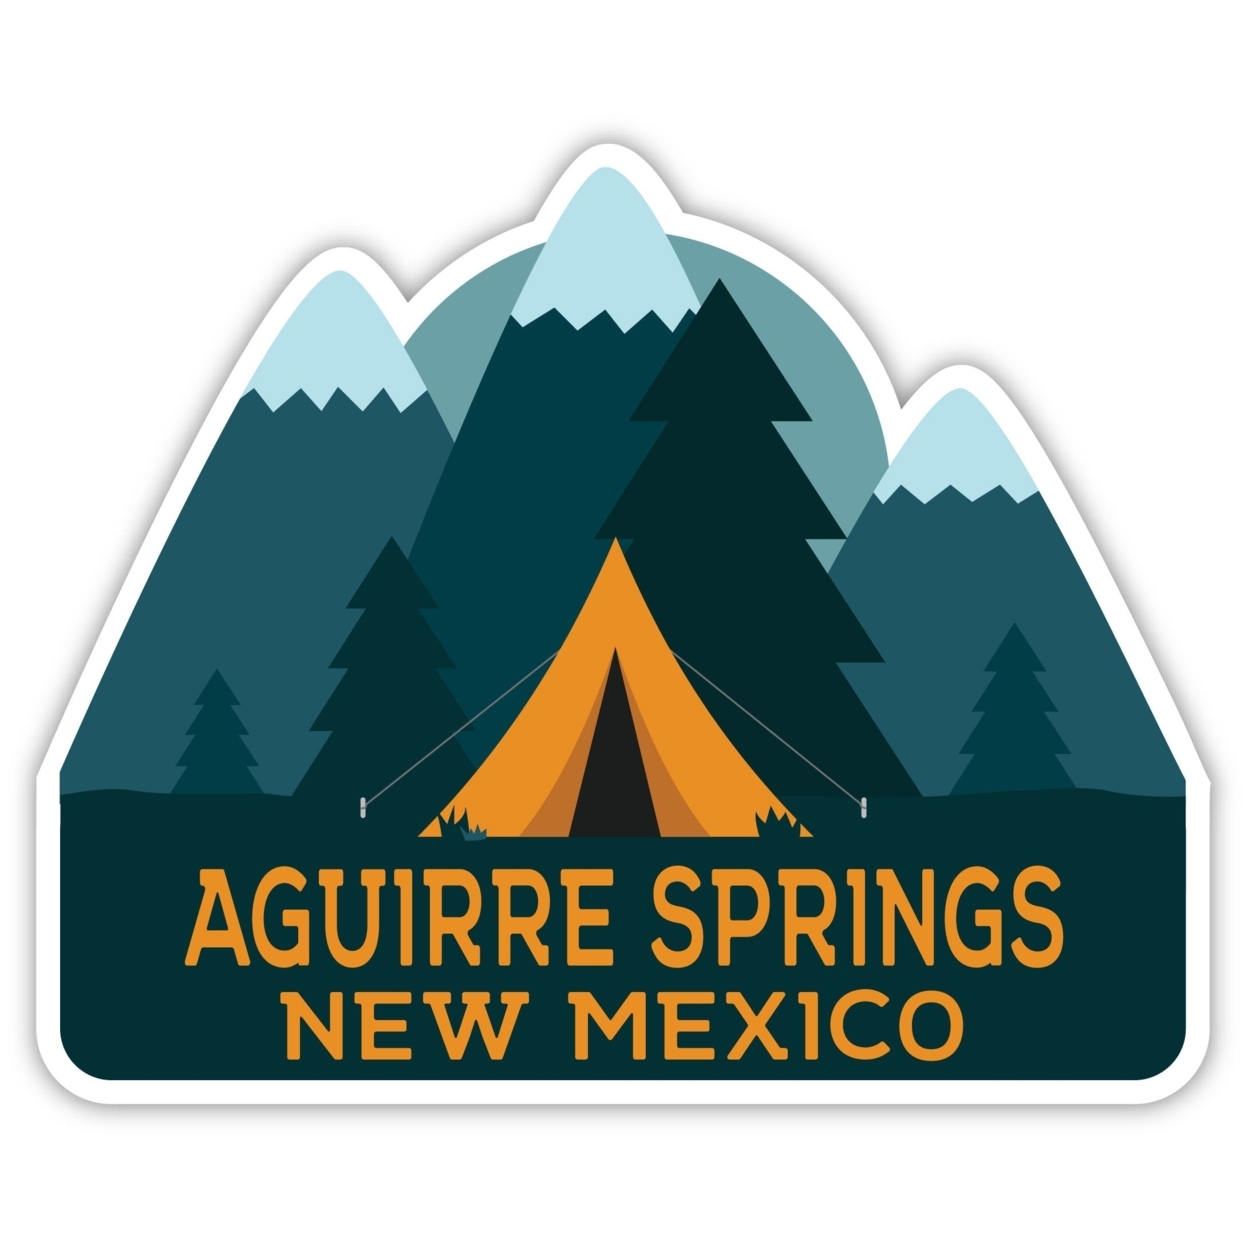 Aguirre Springs New Mexico Souvenir Decorative Stickers (Choose Theme And Size) - Single Unit, 12-Inch, Tent